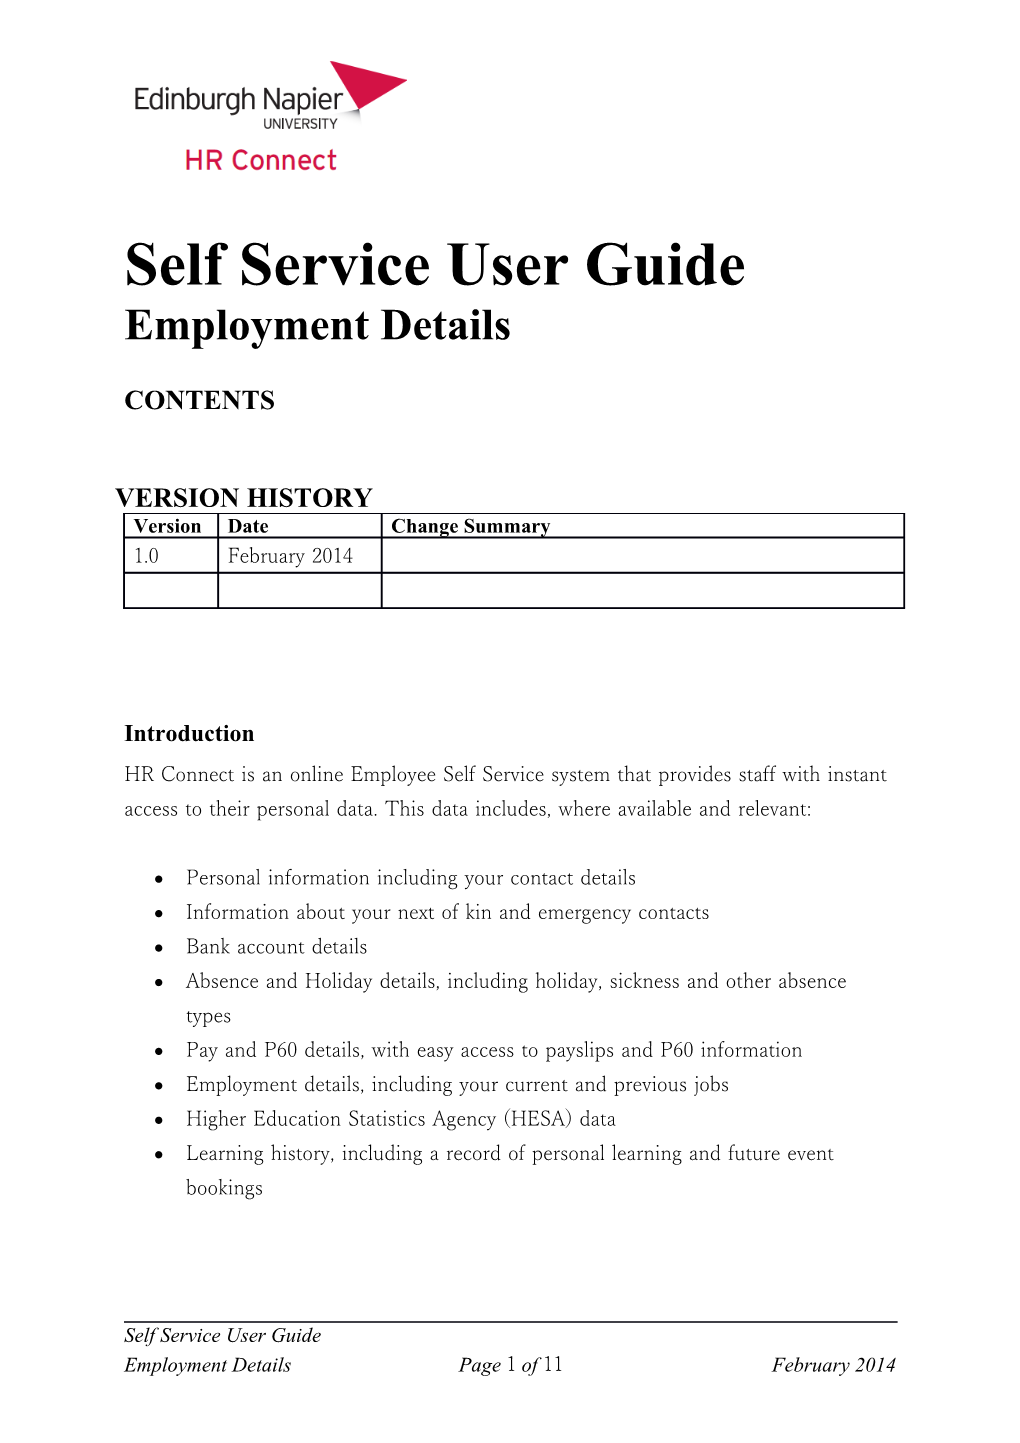 HR CONNECT User Guide 5-Employment